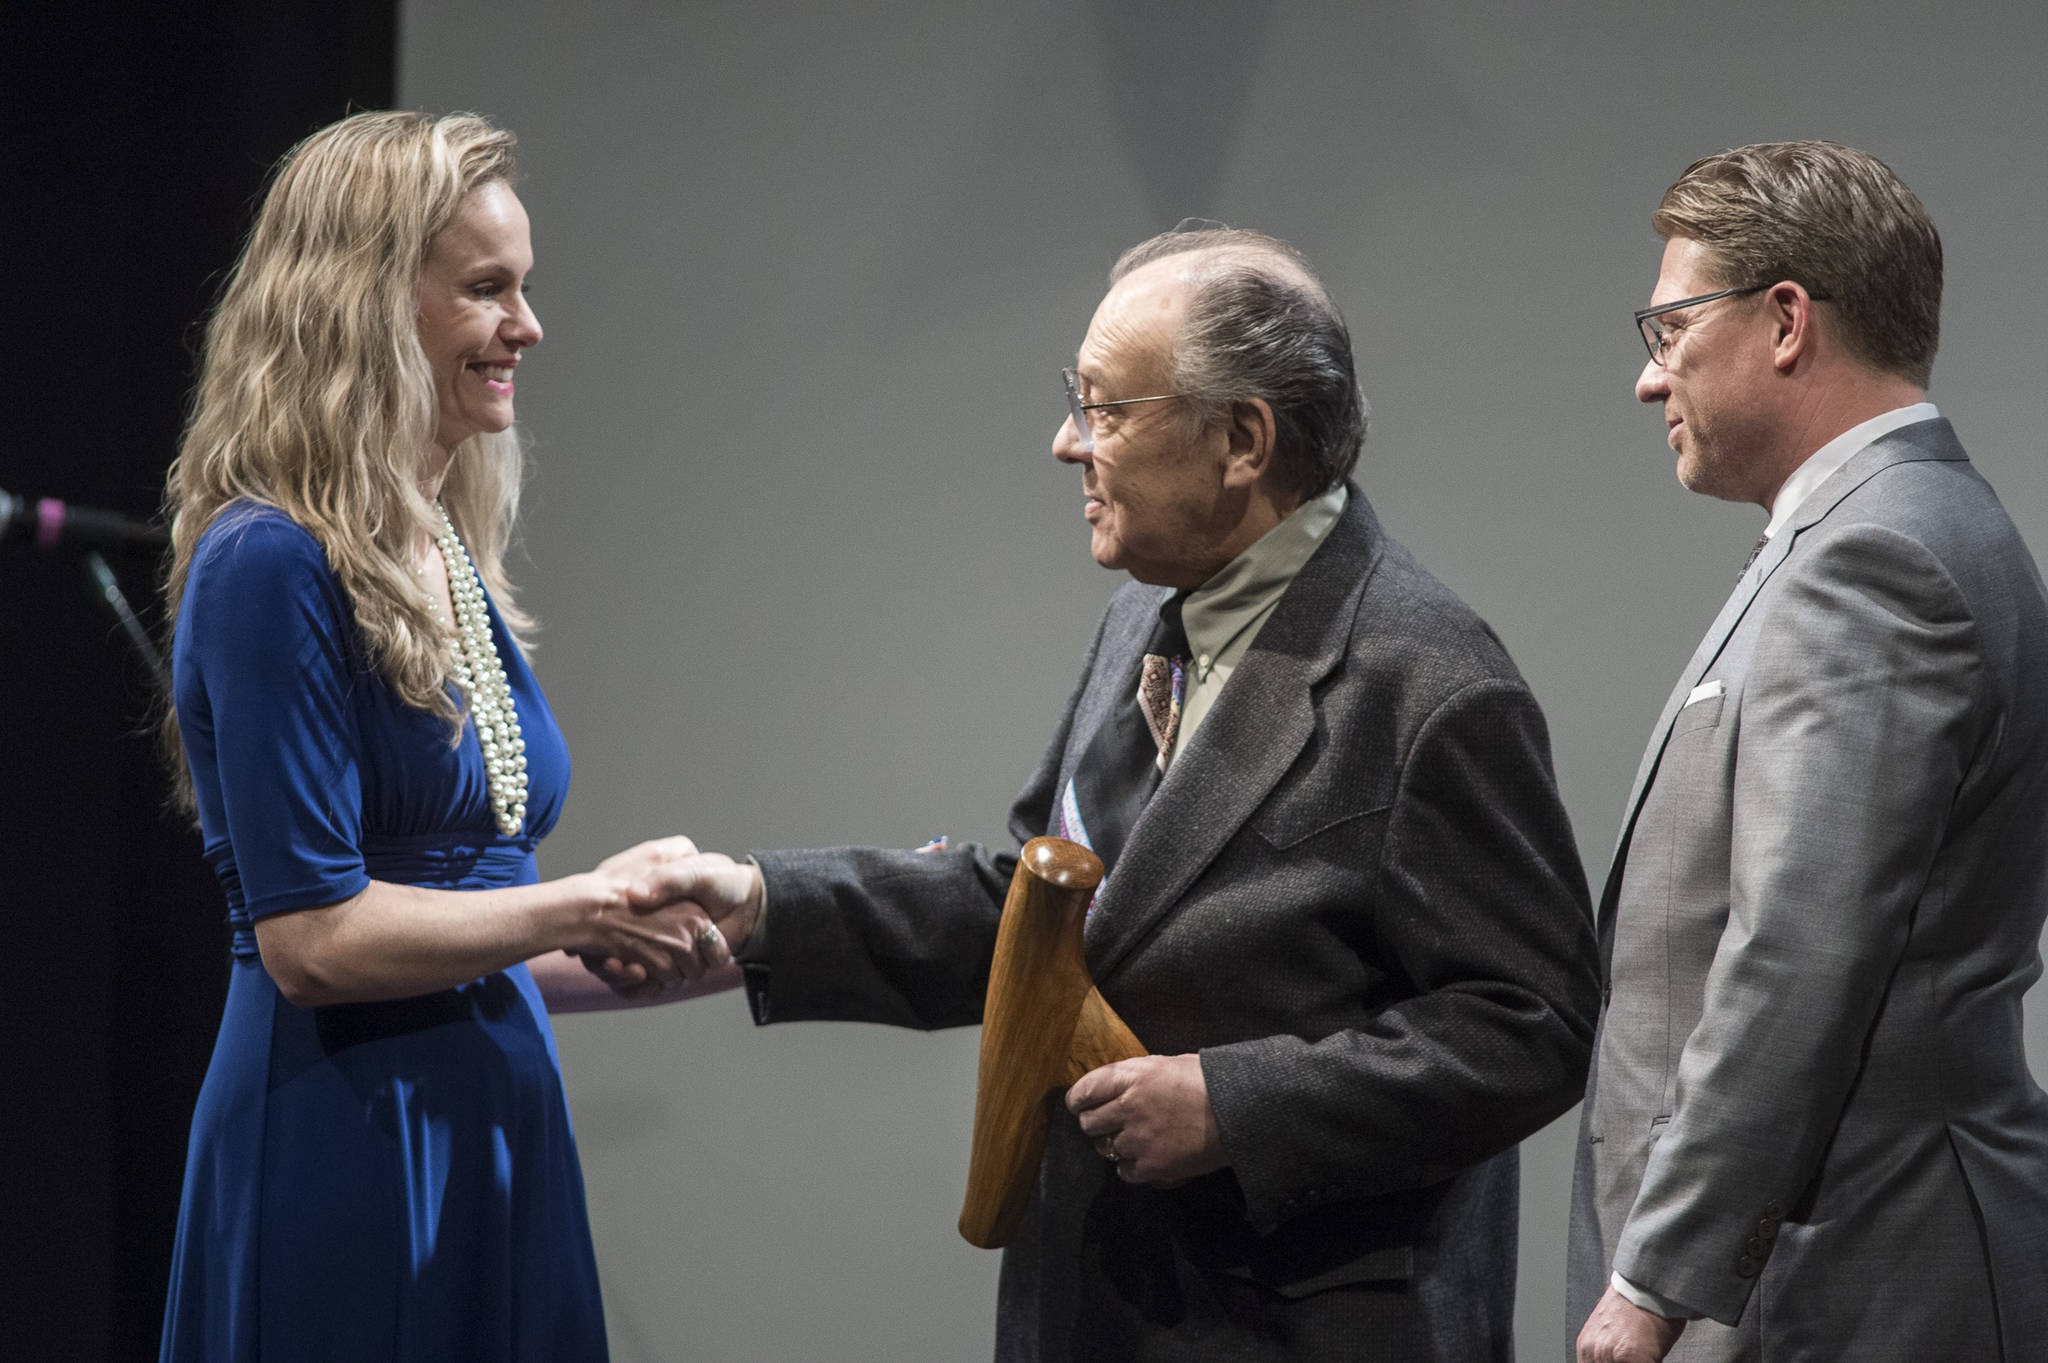 Jack Hudson, center, and his son, John Hudson III, of Metlakatla, receive their Alaska Native Arts Award from Kelly Tshibaka, Commissioner of the Department of Administration, at the 2019 Governor’s Arts and Humanities Awards at the Juneau Arts & Culture Center on Thursday, Feb. 7, 2019. (Michael Penn | Juneau Empire)